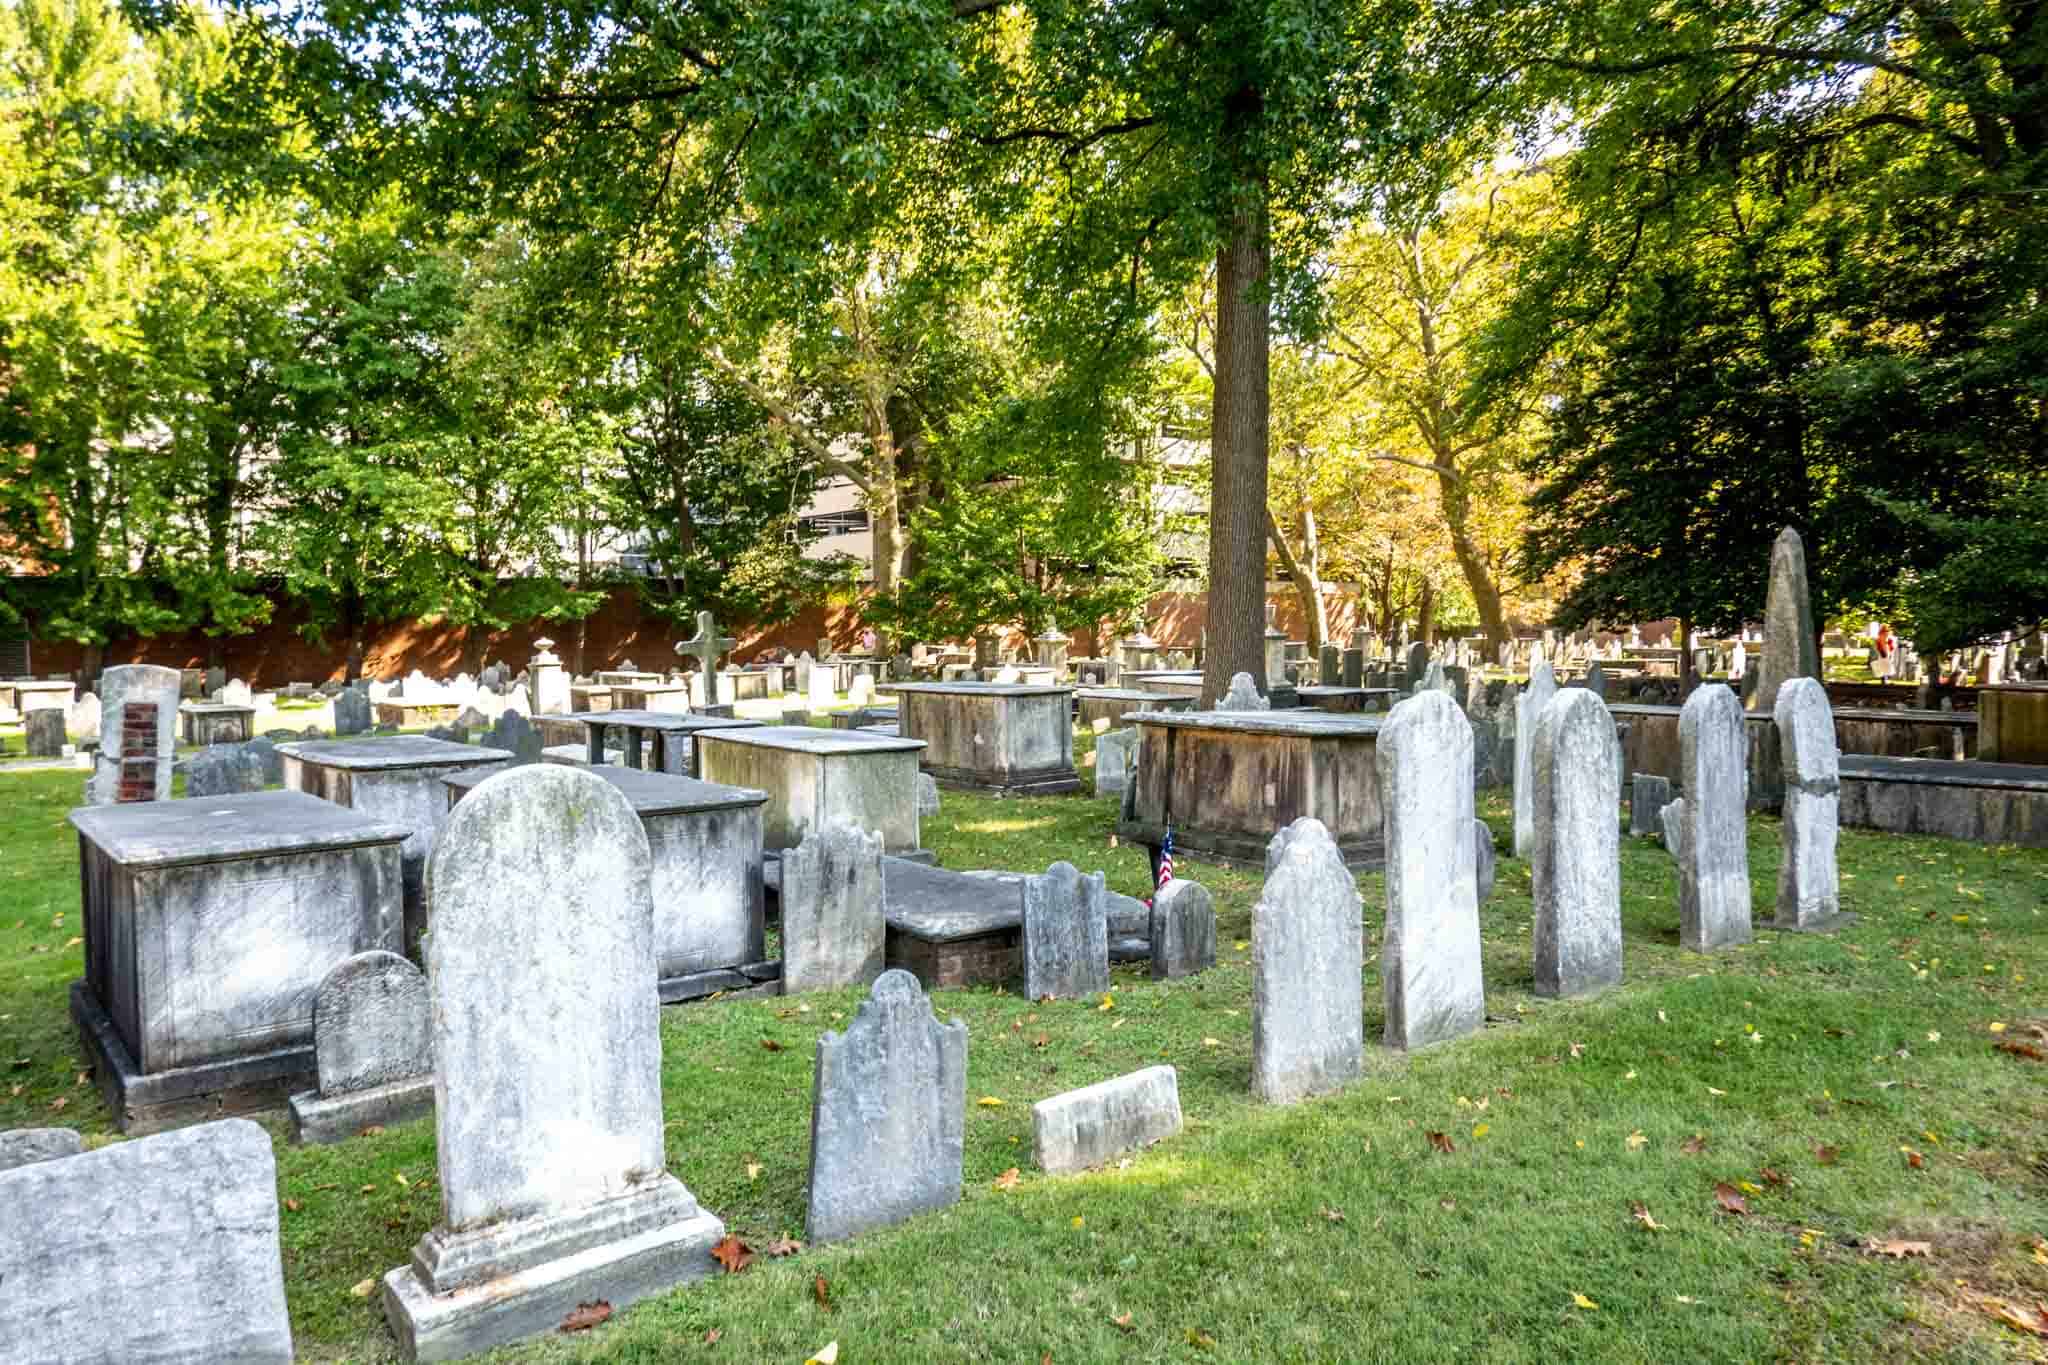 Rows of old tombstones in a burial ground surrounded by trees